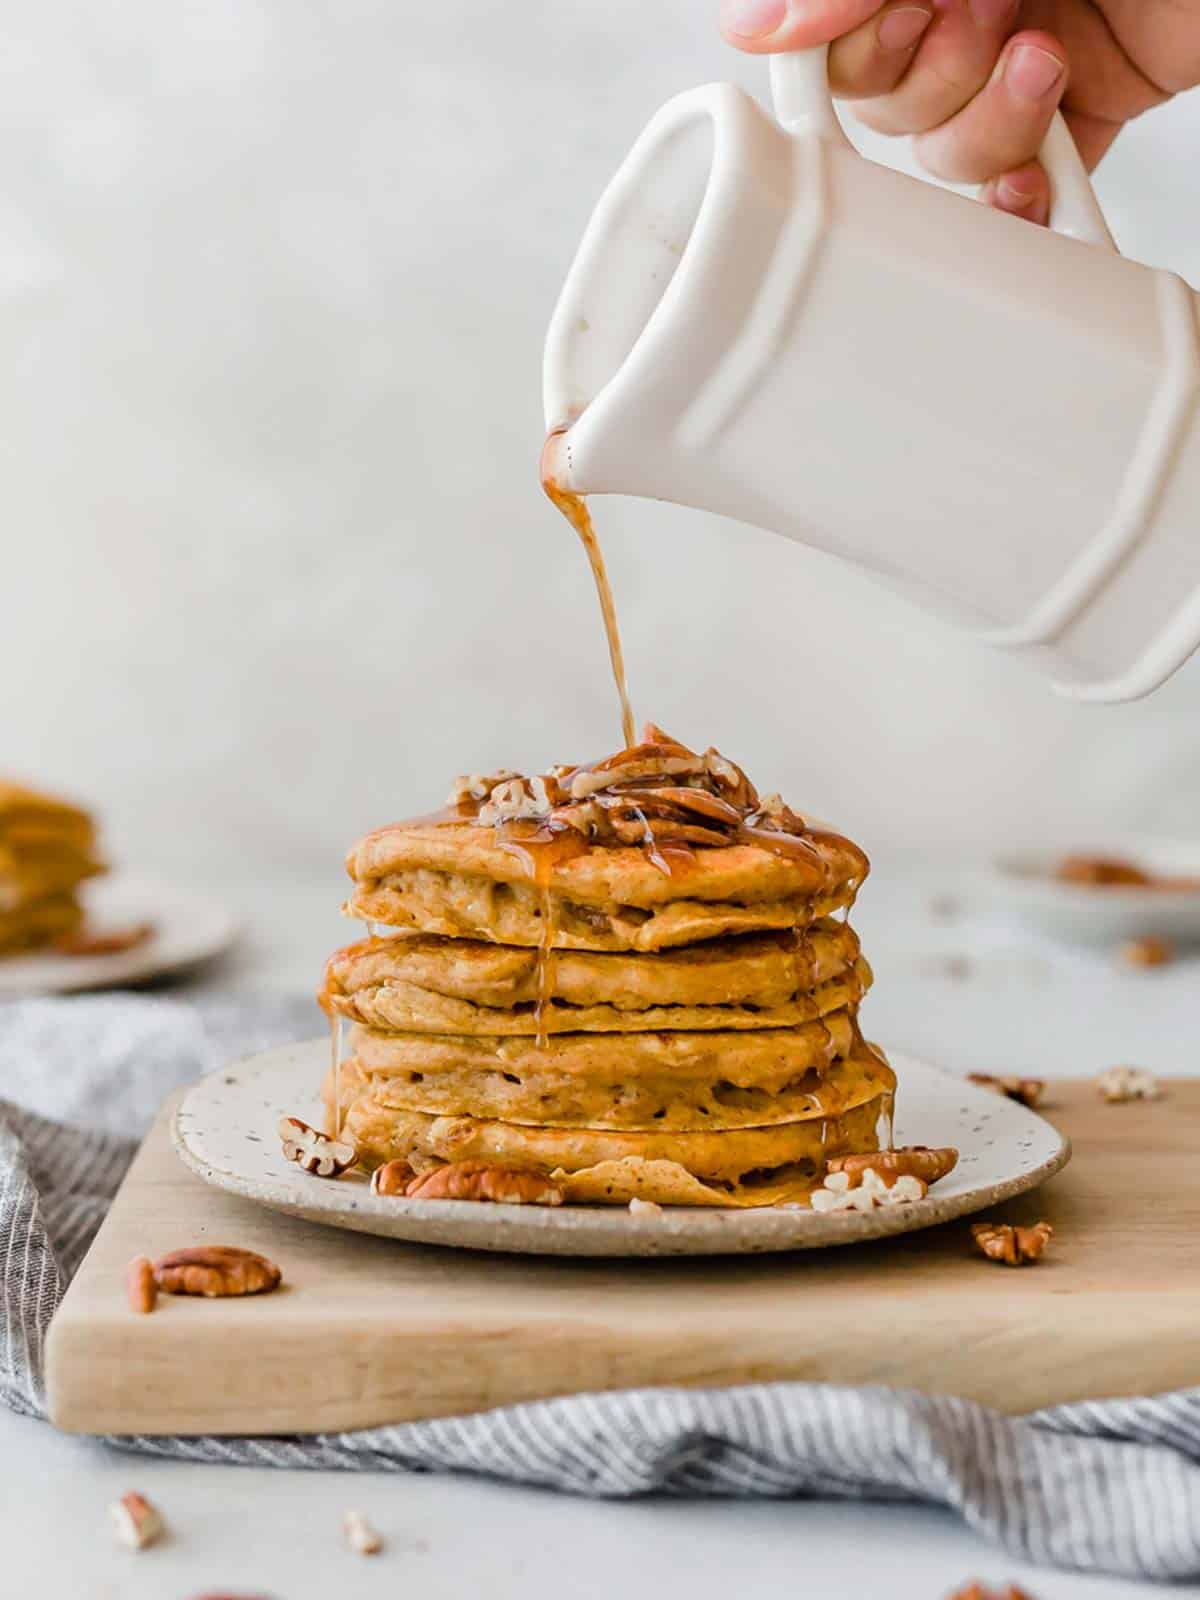 Homemade pecan pancakes syrup being poured over a stack of fluffy pumpkin pancakes.